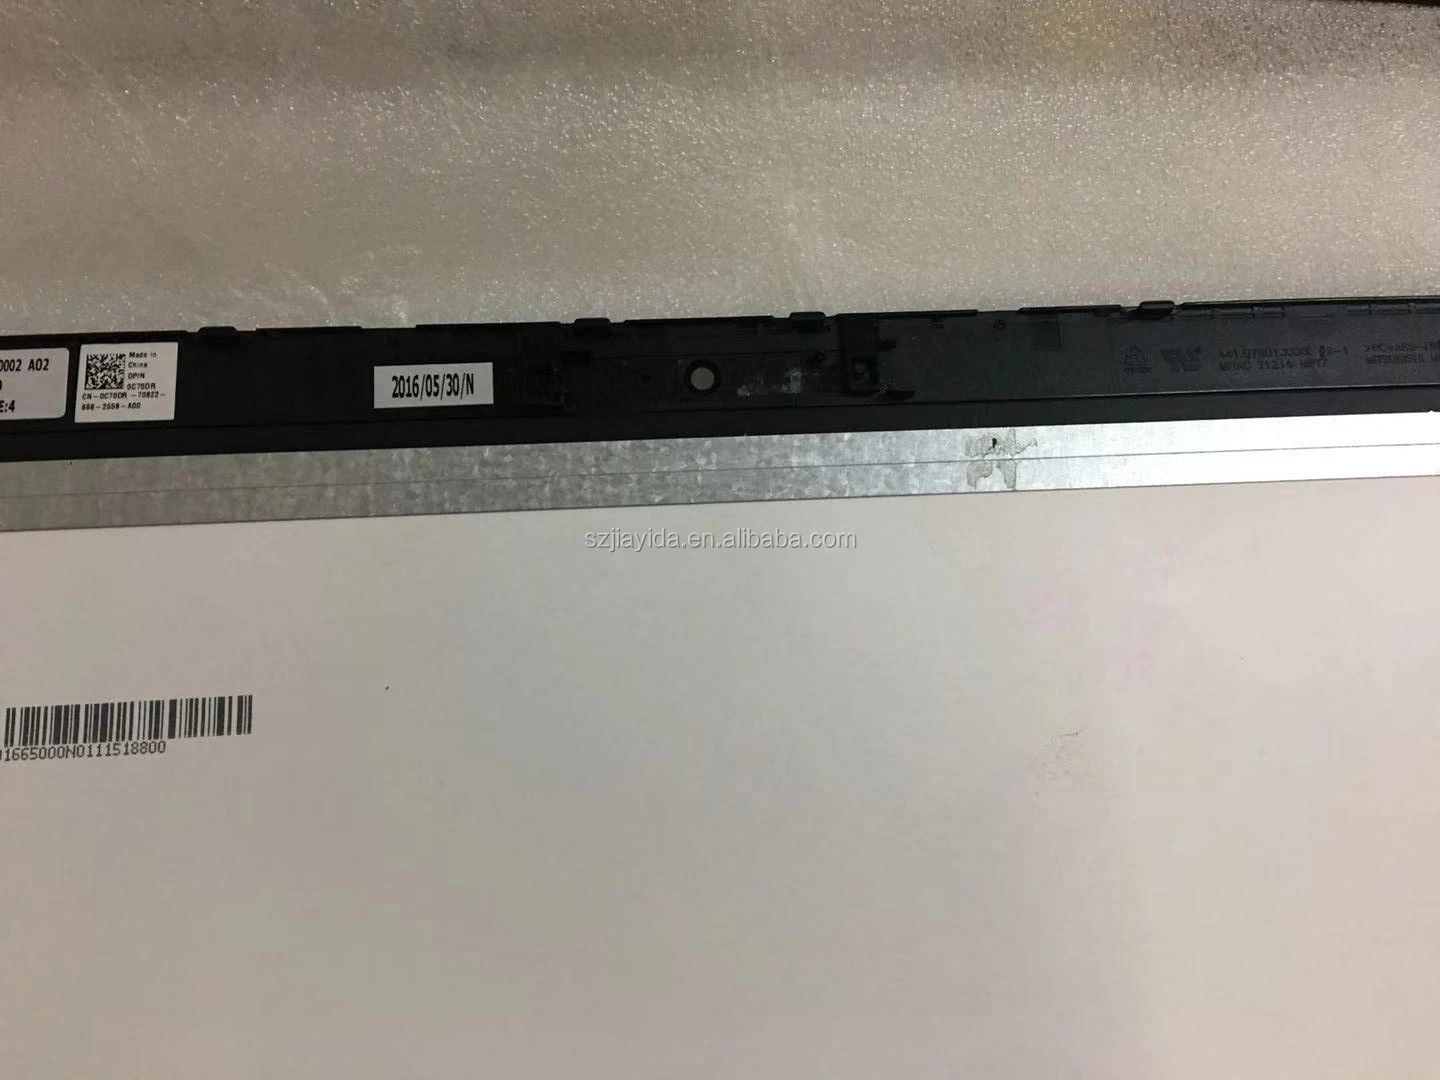 13.3' LCD Display Panel Touch Glass Digitizer Screen Assembly Bezel For DELL Inspiron 13 5000 P69G P69G001 Full HD B133HAB01.0